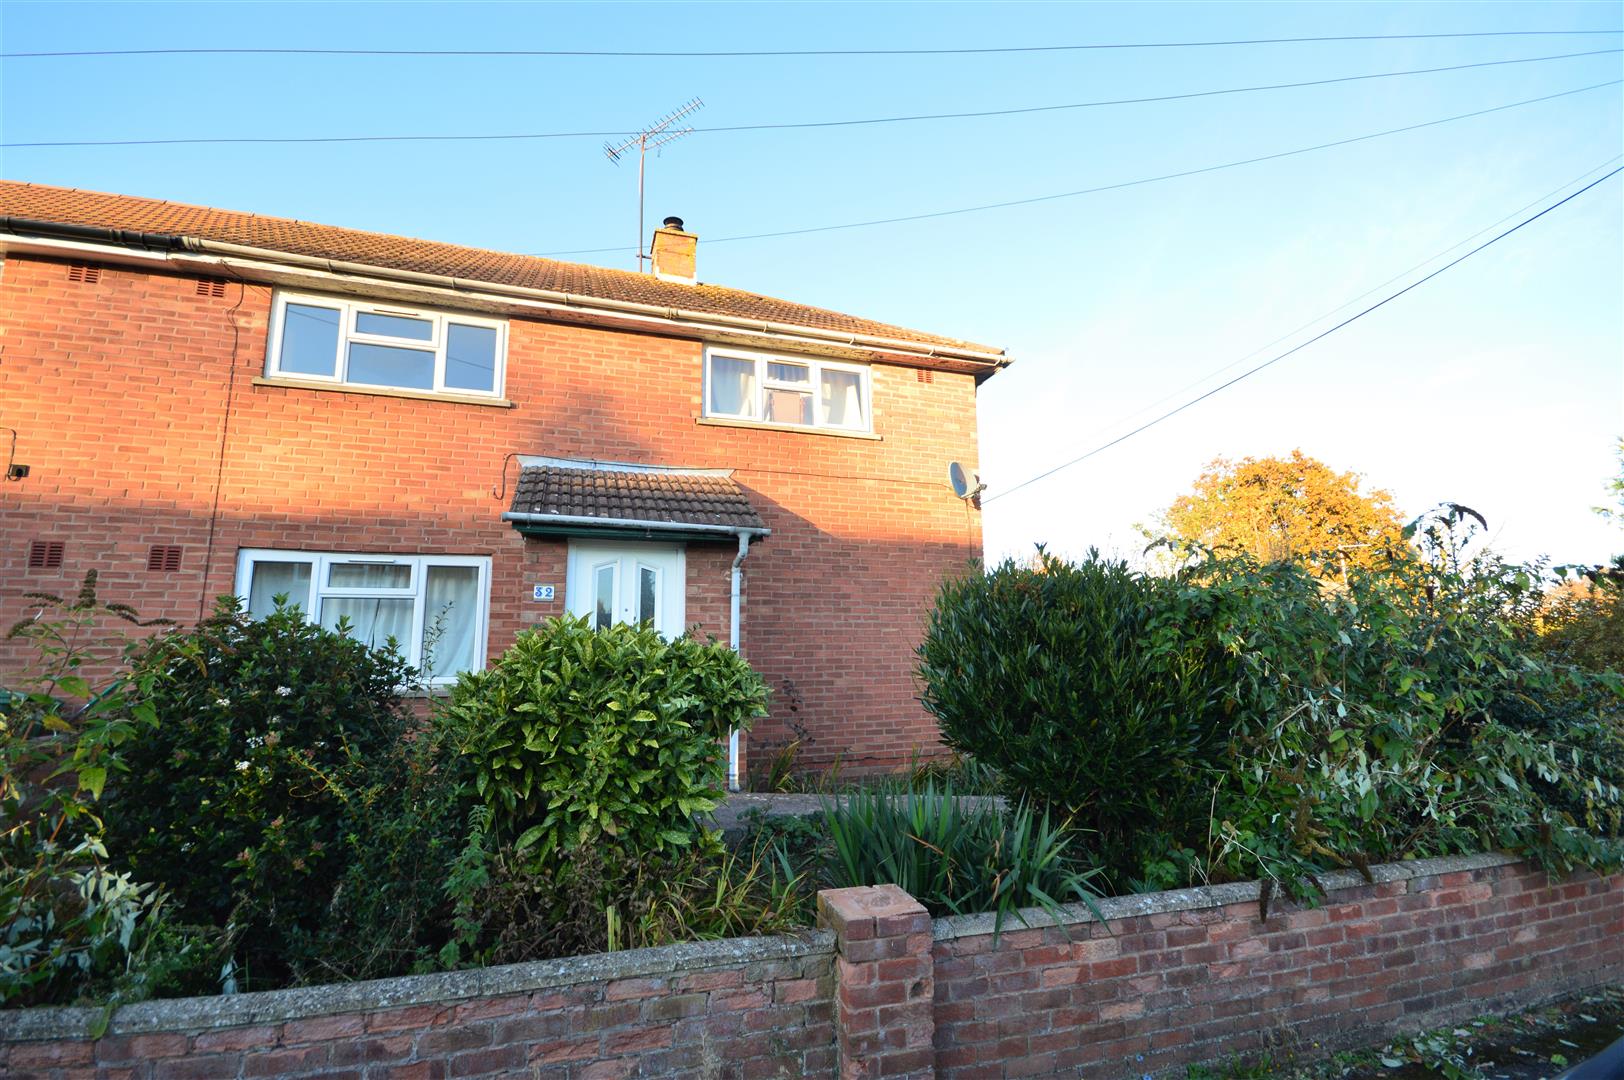 3 bed terraced for sale in Weobley - Property Image 1